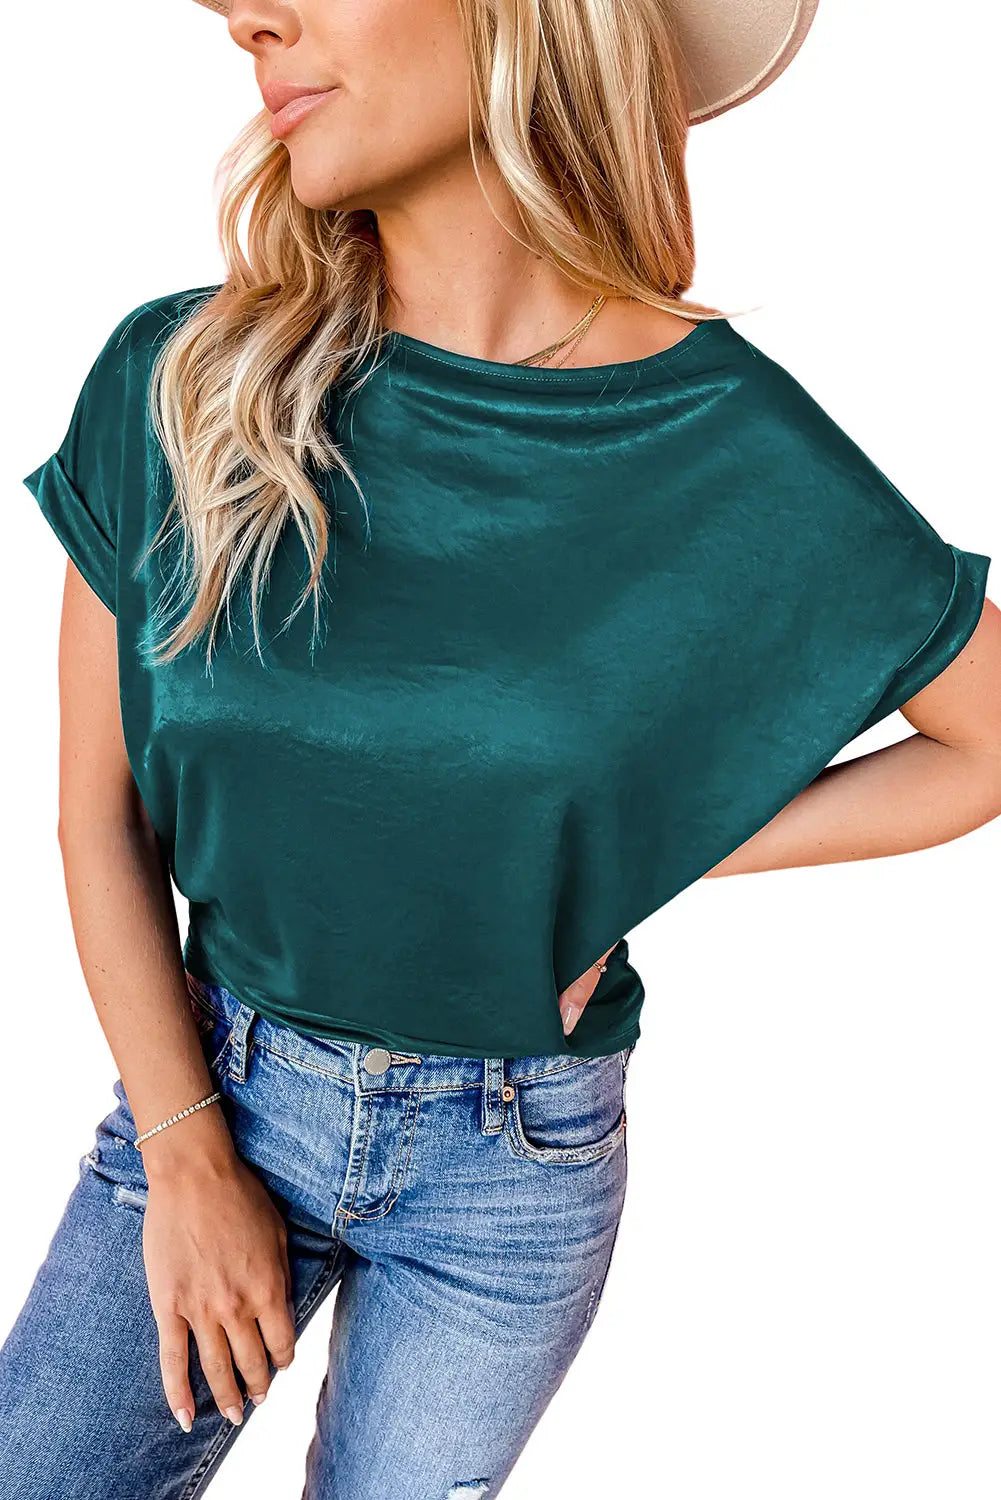 Apricot solid color short sleeve t shirt - tops